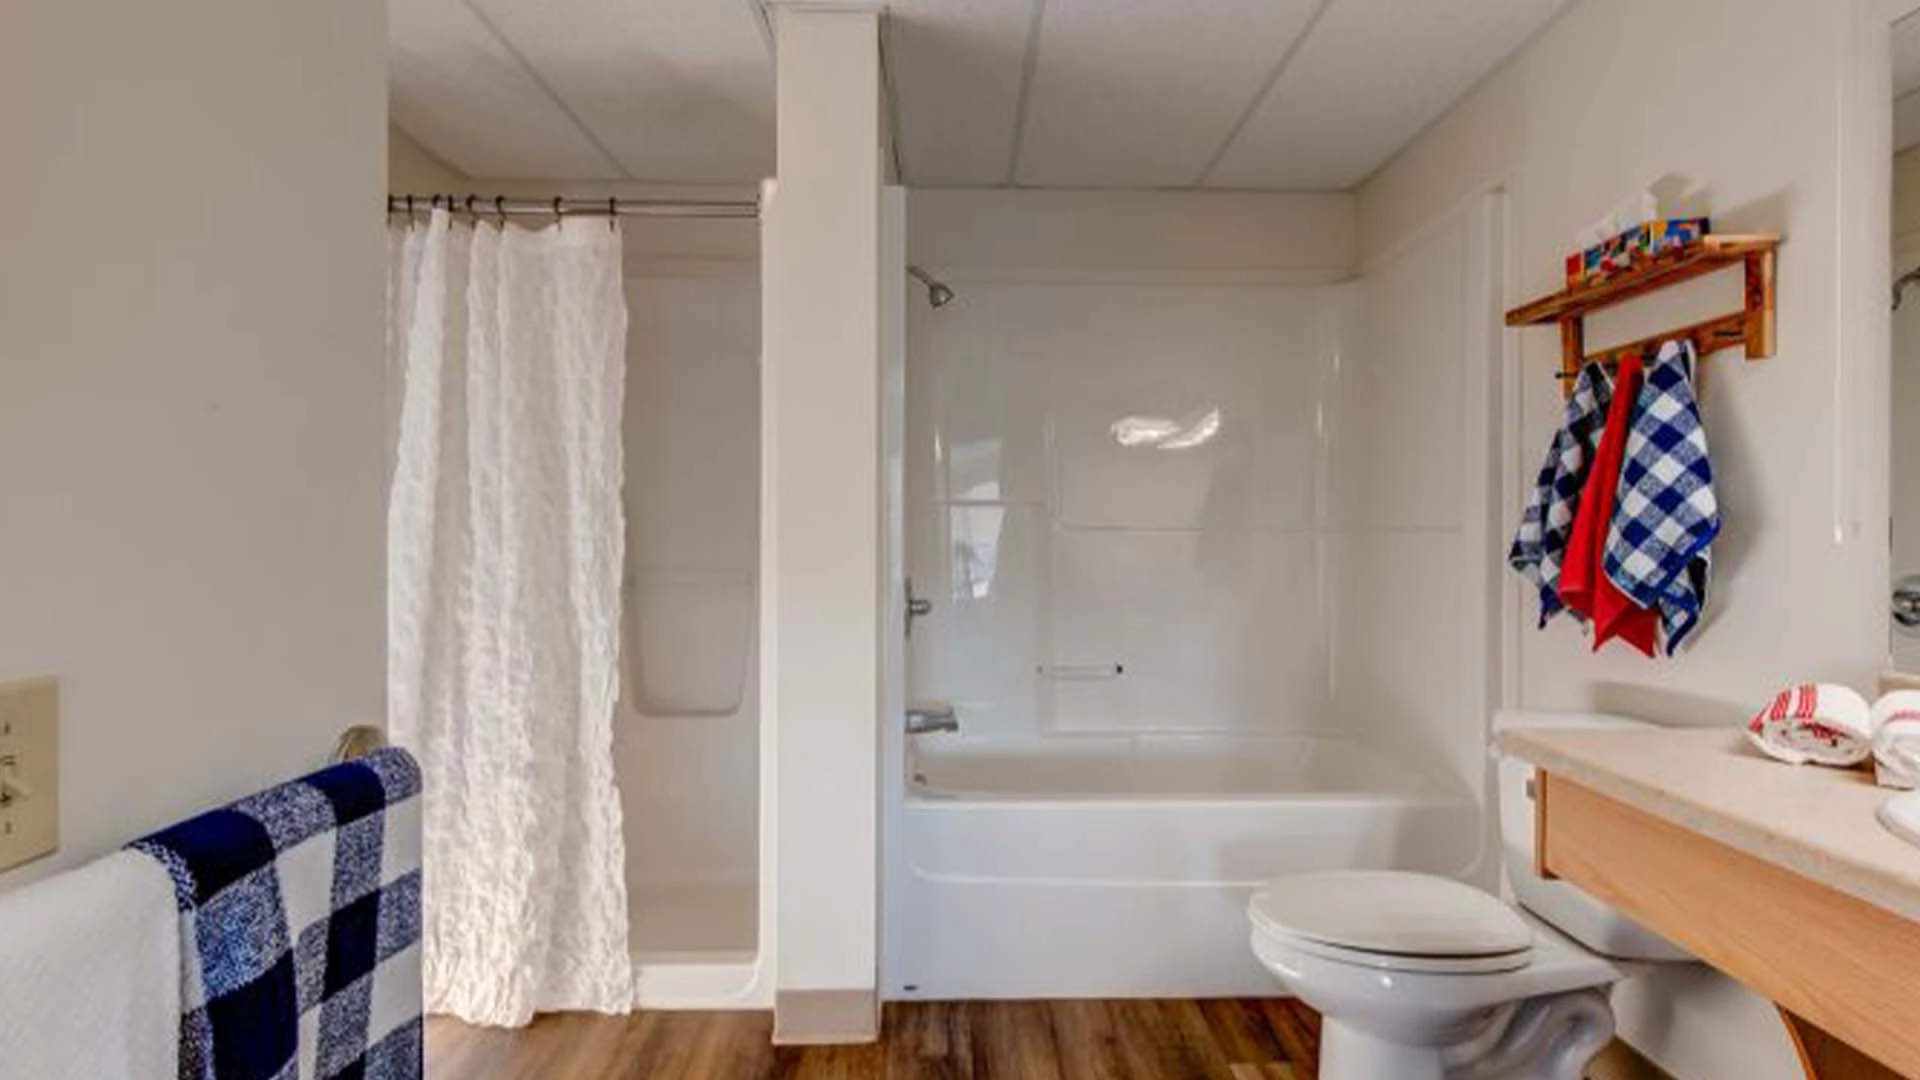 Bathroom in a suite at Summerwood Village Retirement home